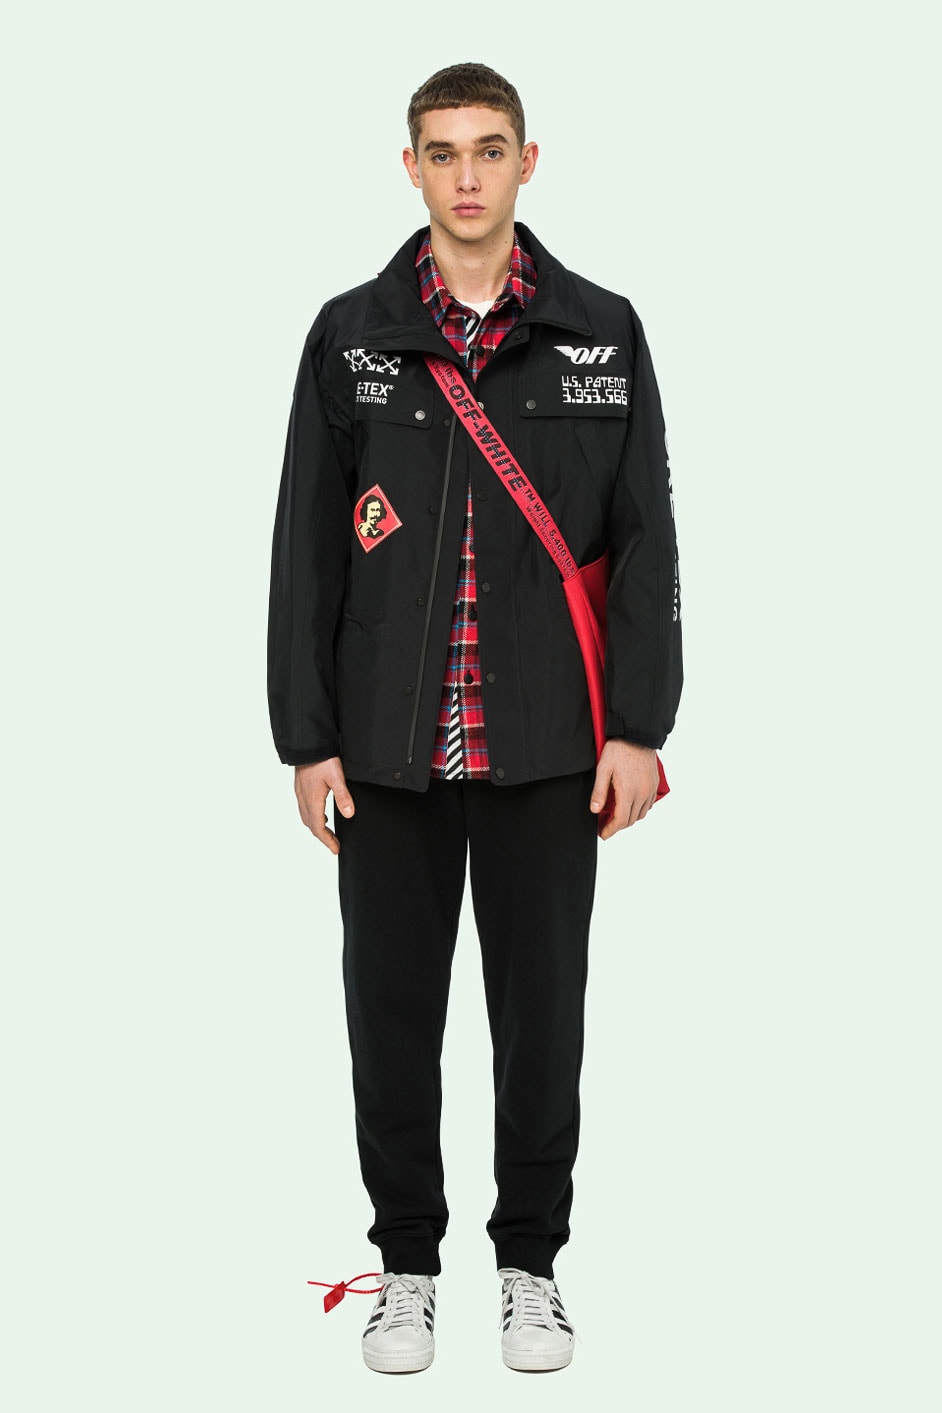 off white gore tex capsule collection pre order october 8 2018 july 5 launch release date info anorak black pants jacket hoodie graphics white